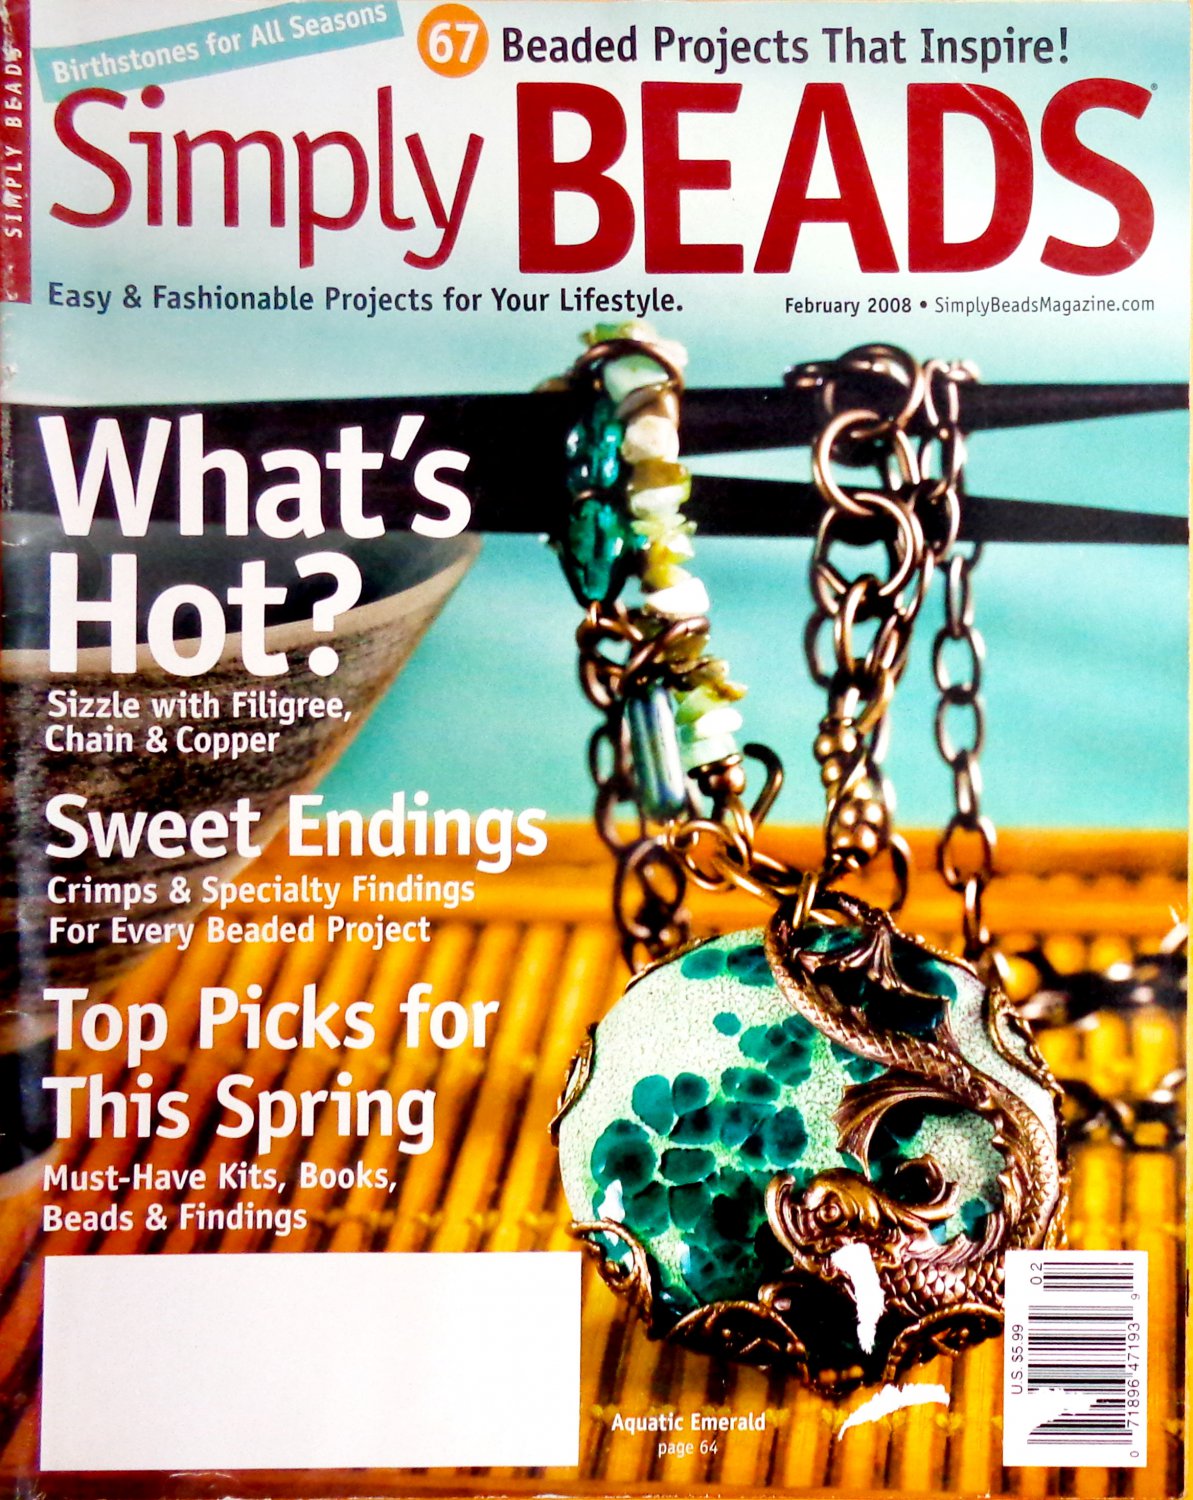 Simply Beads Magazine February 2008 Volume 4 Number 1